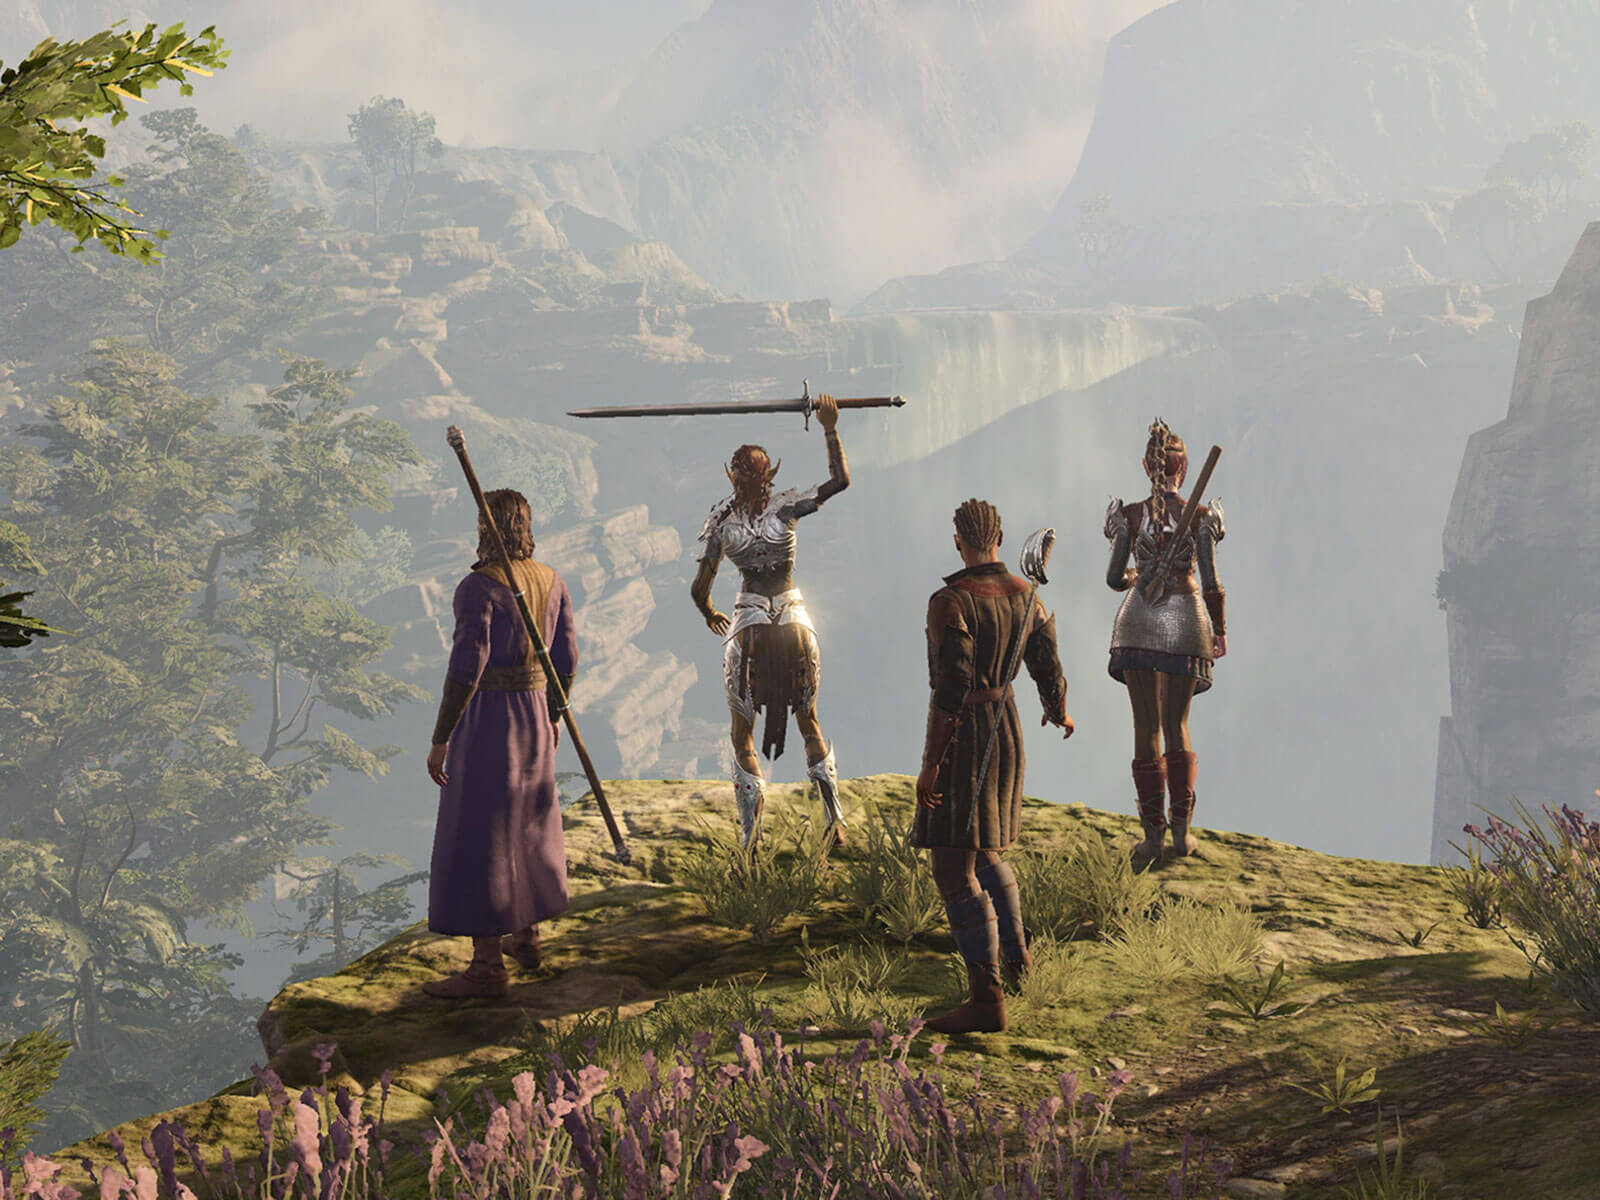 Baldur’s Gate 3 screenshot of a four-character party standing at the edge of a scenic ravine.